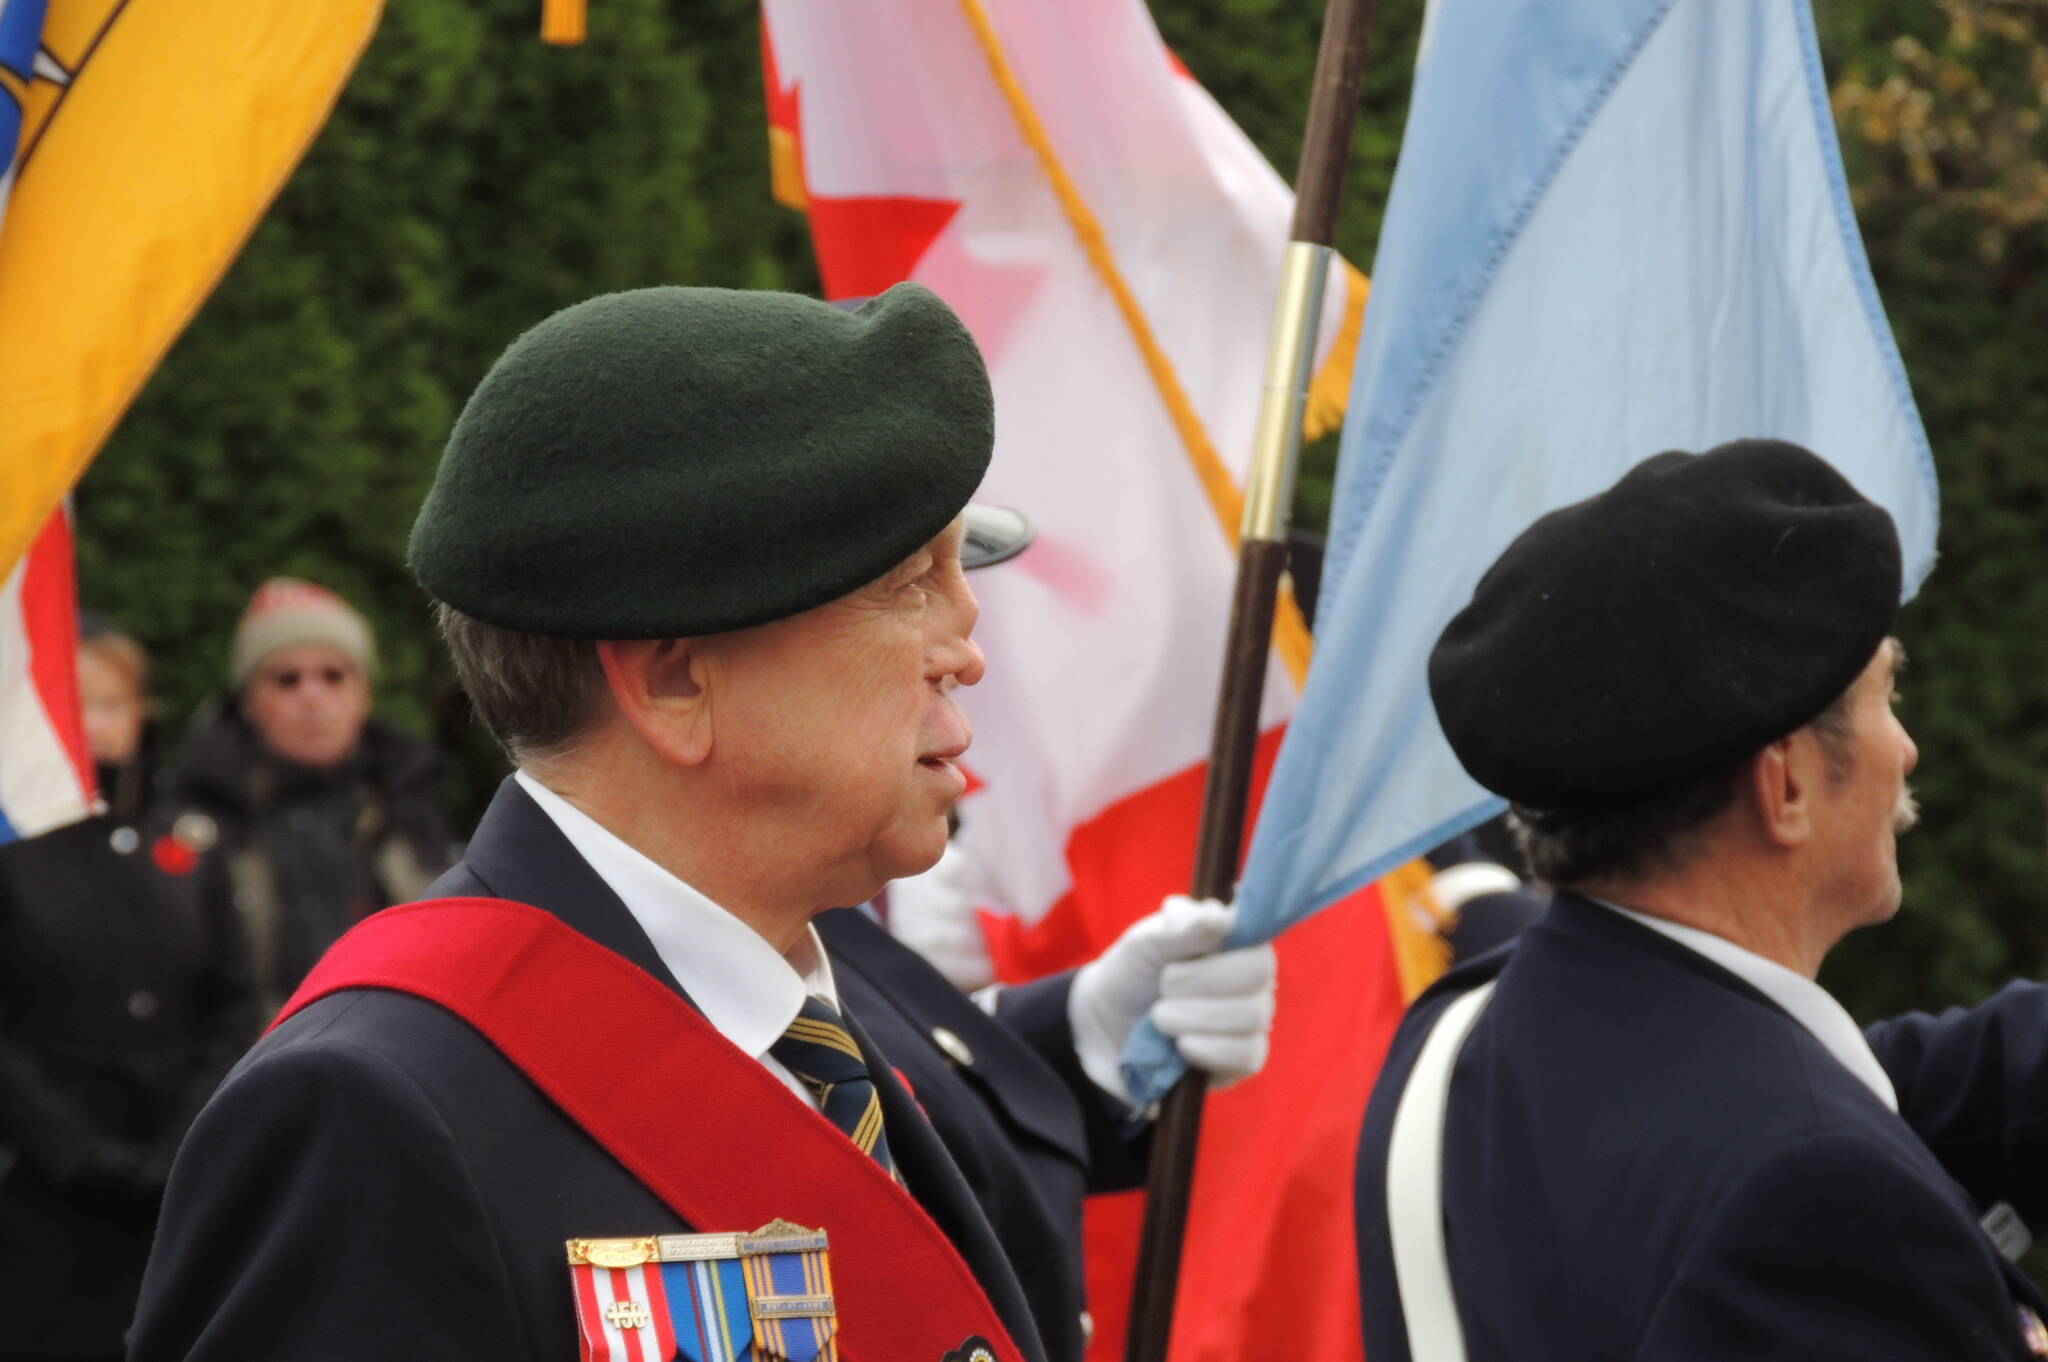 30983214_web1_221118-AHO-Remembrance-Day-Photos_9